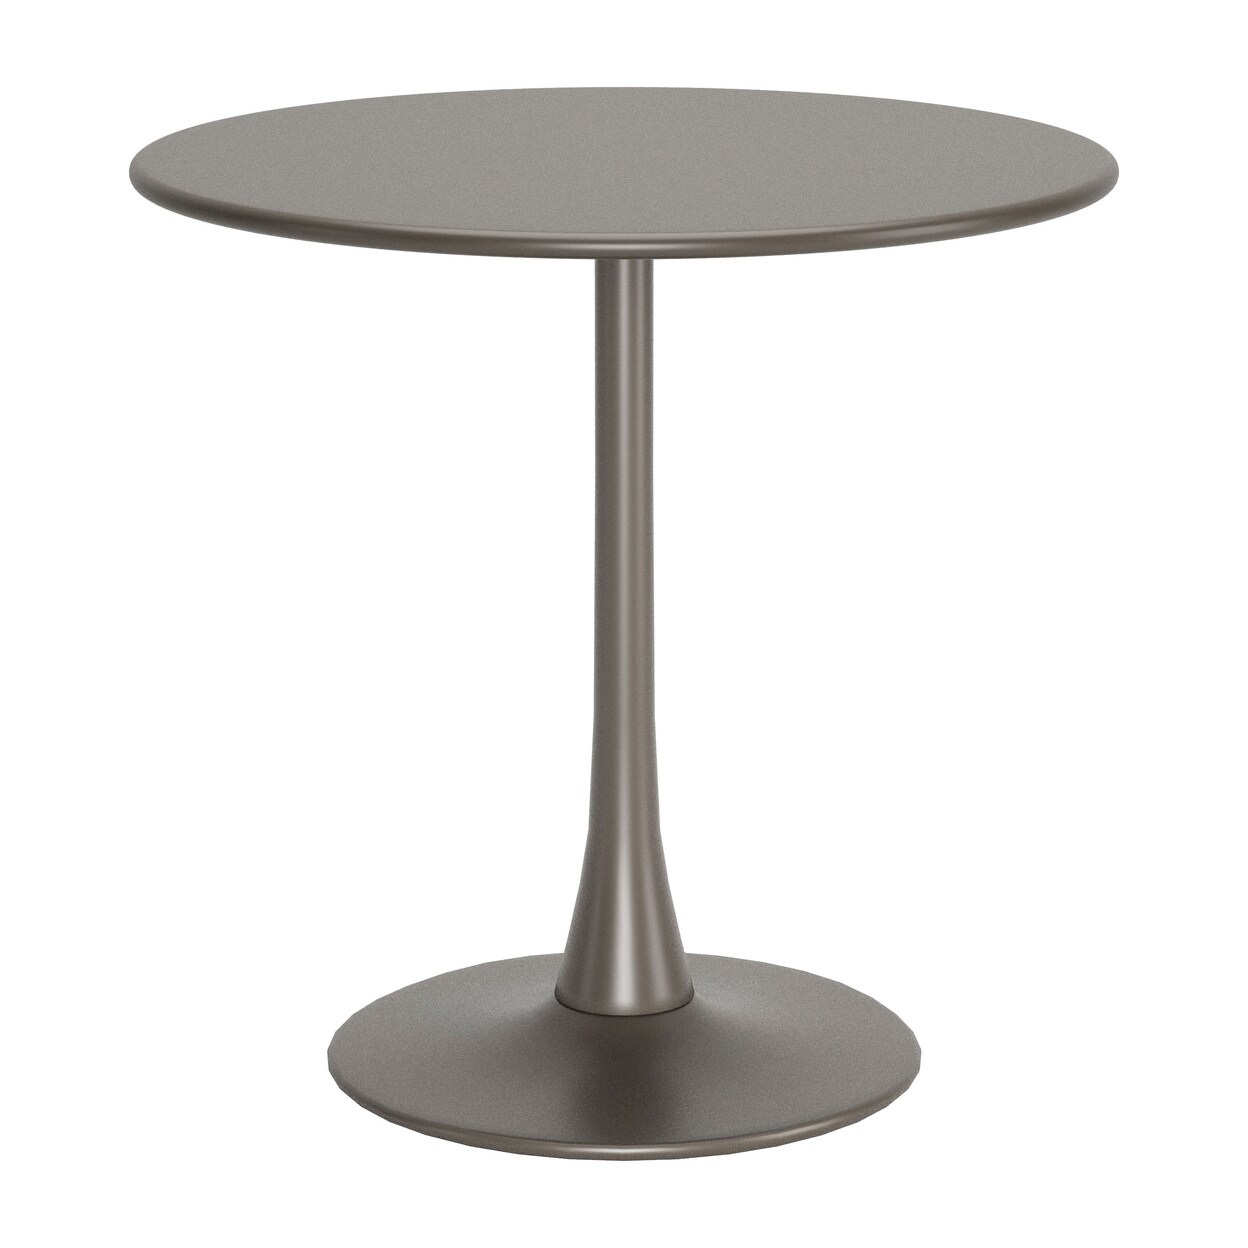 Zuo Modern Contemporary Inc. Soleil Dining Table Taupe